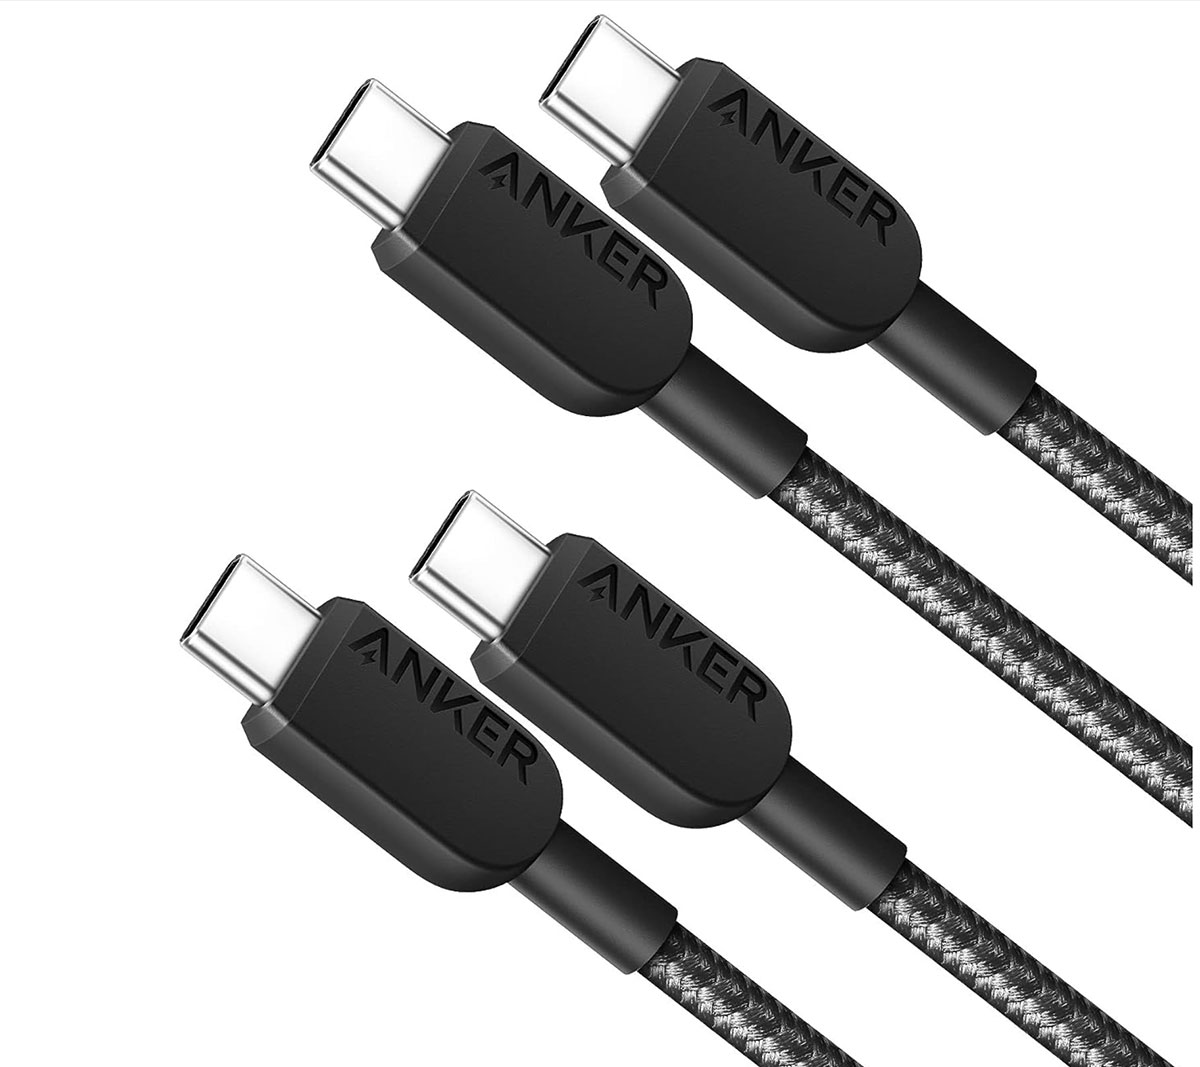 Anker 310 USB-C to USB-C Cable – Best budget USB-C cable for iPhone